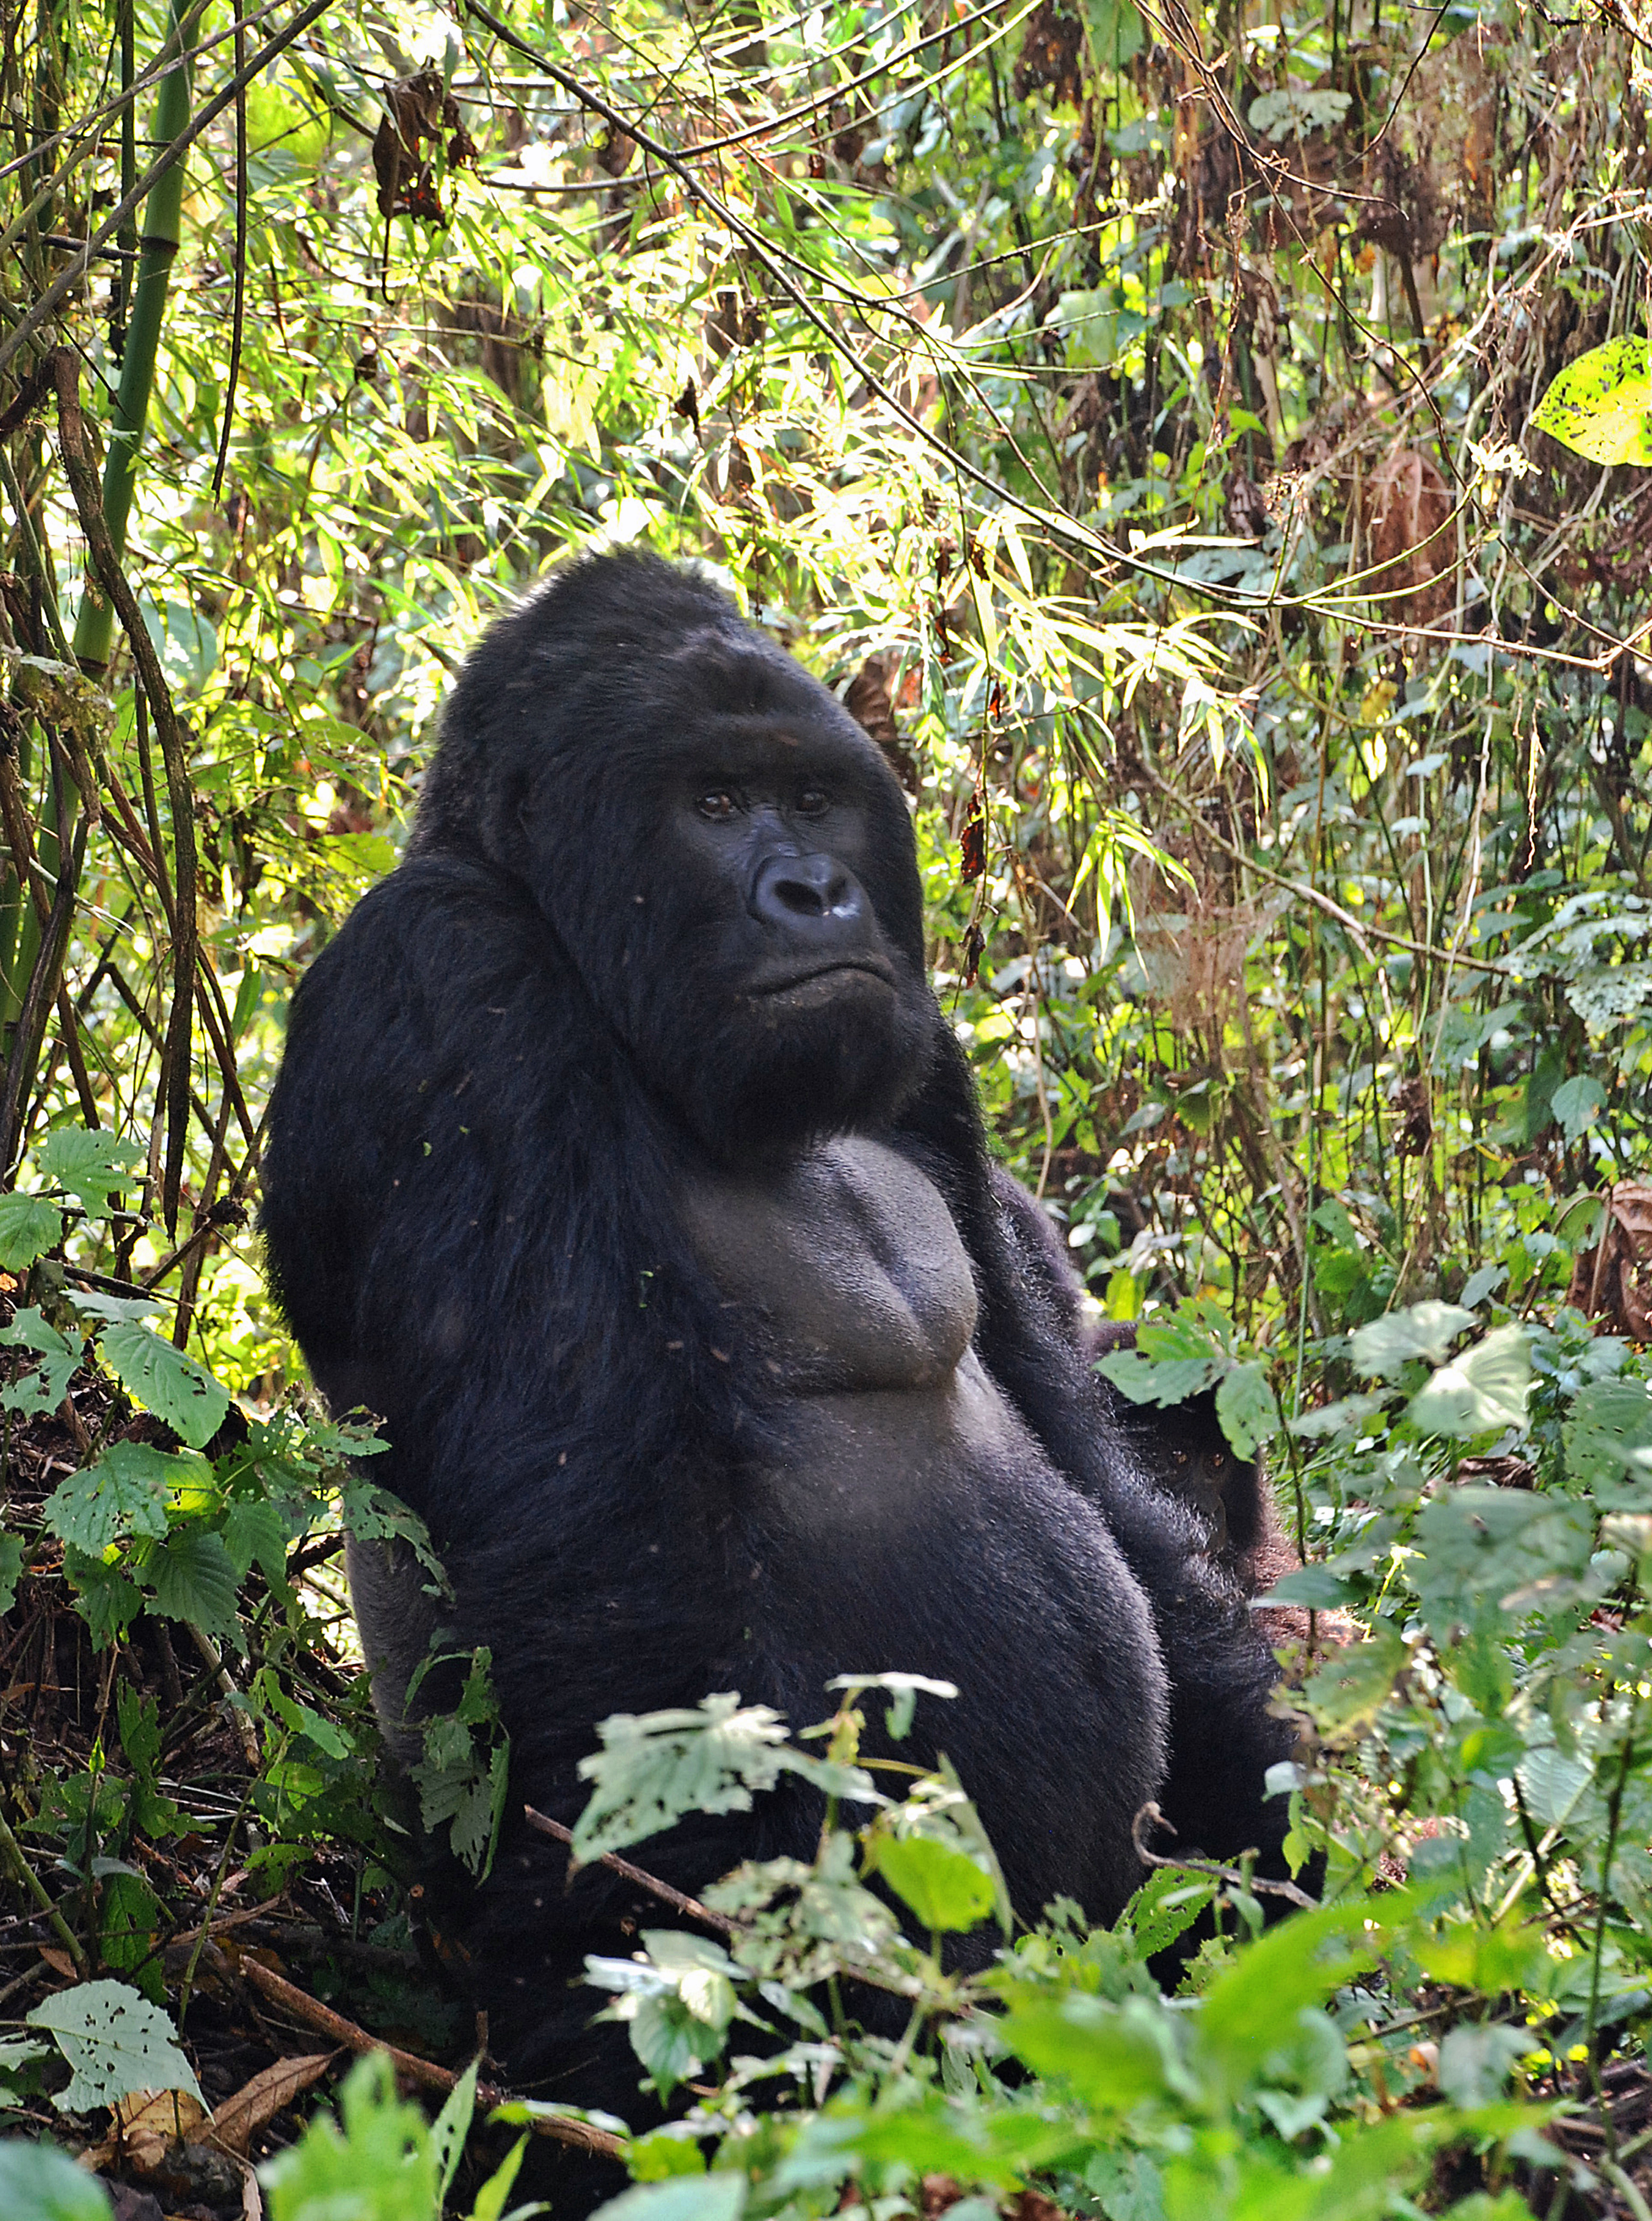 (FILES) This file photo taken on August 1, 2015 shows a male mountain gorilla in the jungle at Bukima in Virunga National Park, eastern Democratic Republic of Congo.  The world's largest gorillas have been pushed to the brink of extinction by a surge of illegal hunting in the Democratic Republic of Congo, and are now critically endangered, officials said September 4, 2016. With just 5,000 Eastern gorillas (Gorilla beringei) left on Earth, the majestic species now faces the risk of disappearing completely, officials said at the International Union for Conservation of Nature global conference in Honolulu.  / AFP PHOTO / PETER MARTELL